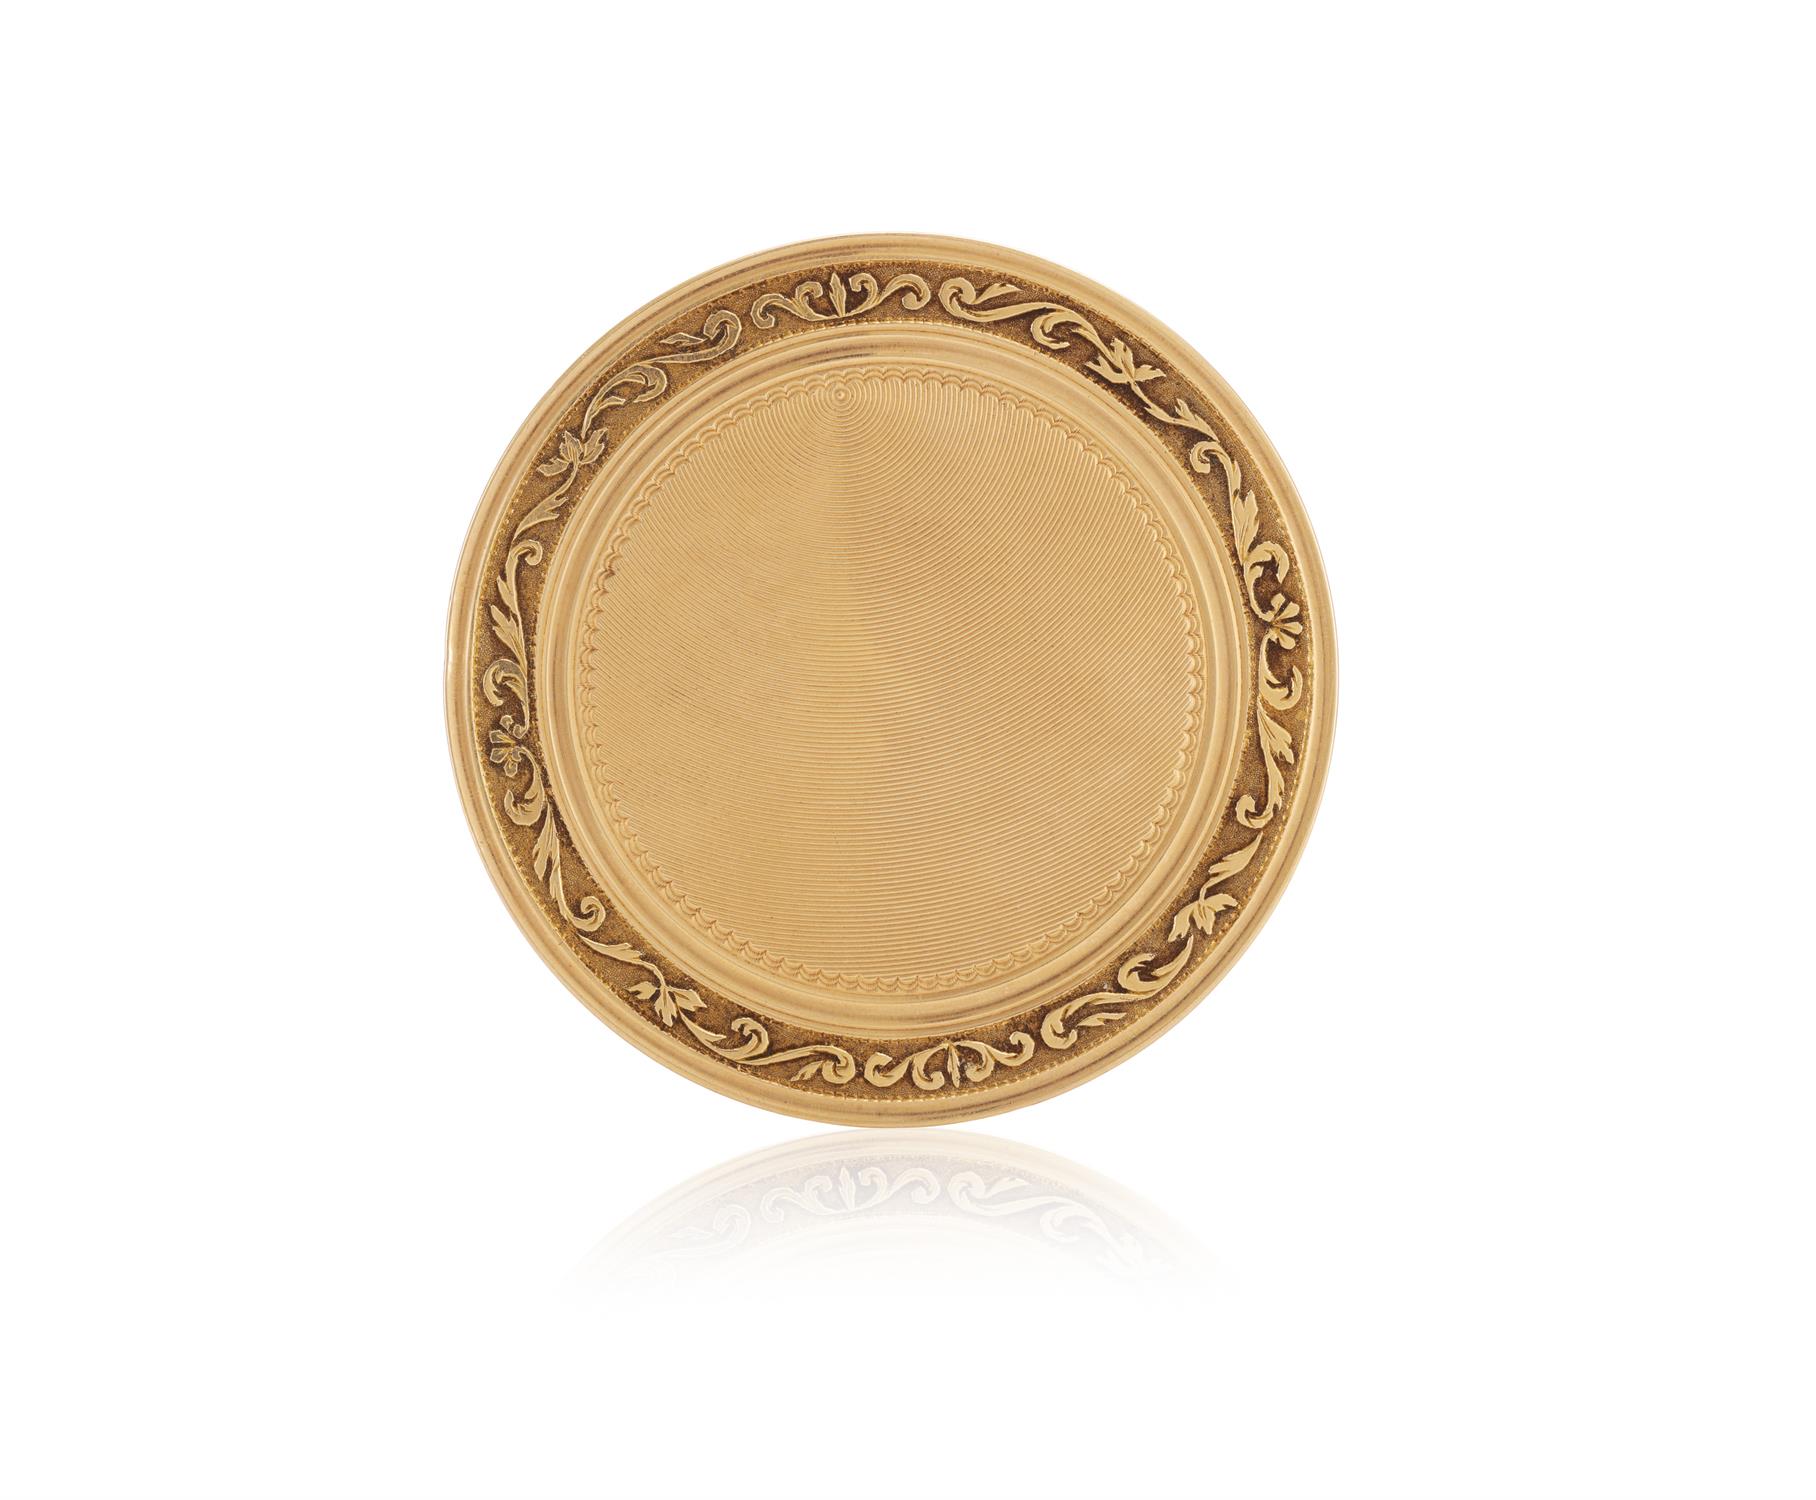 A FRENCH GOLD SNUFF BOX of circular form, the rim with foliate scroll decoration, - Image 2 of 4